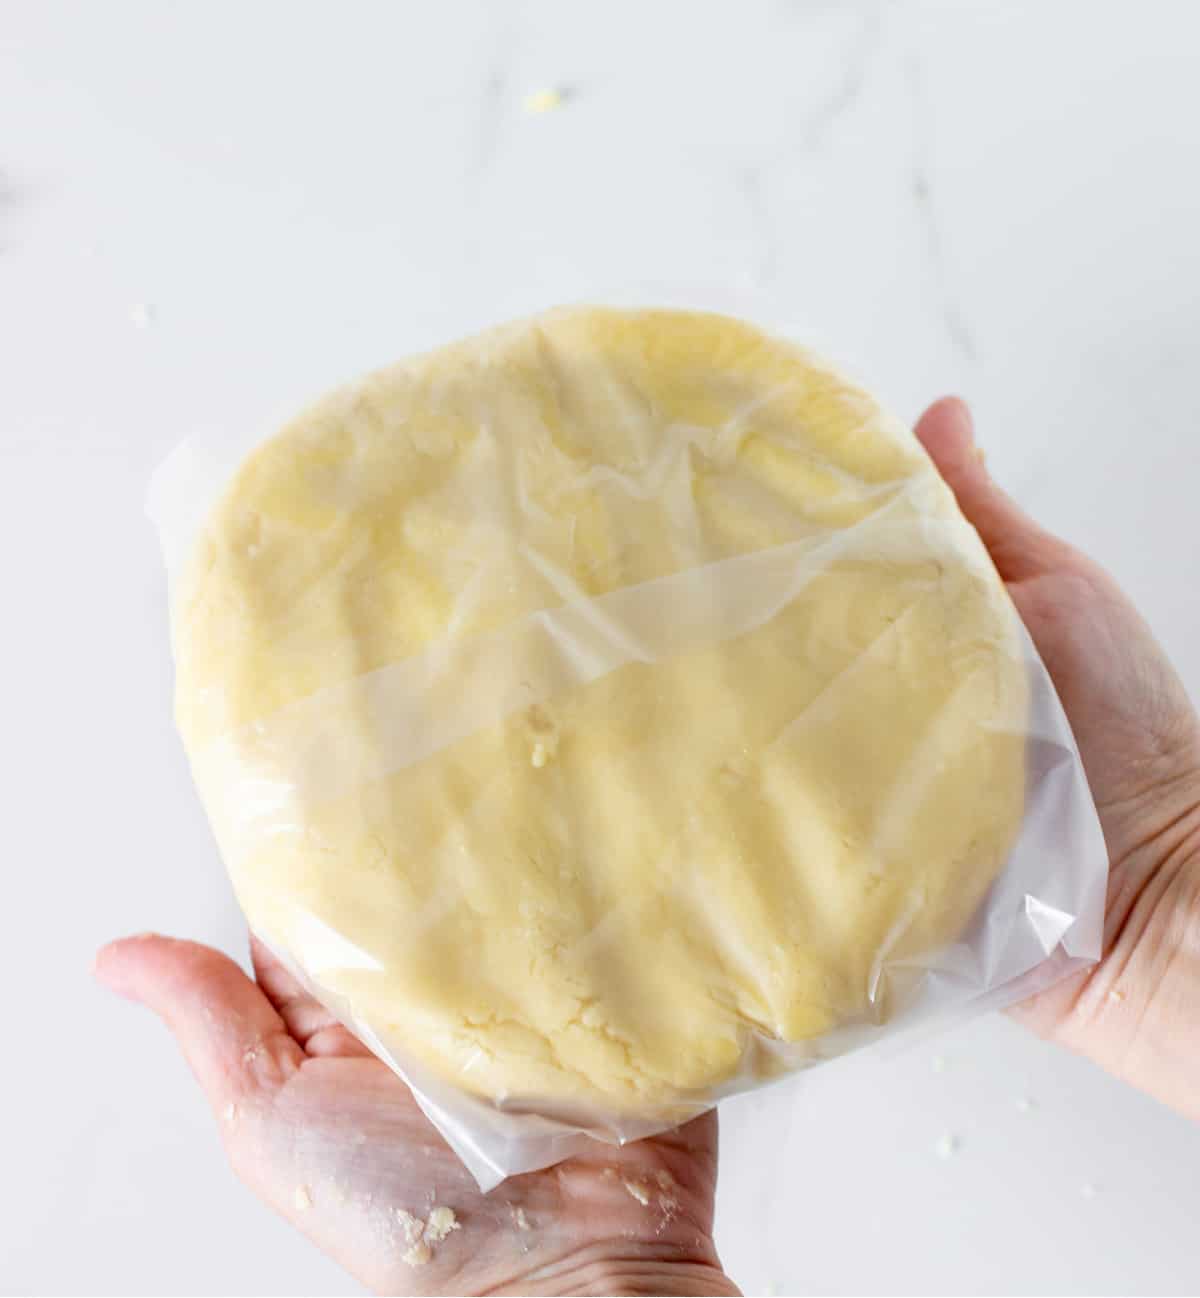 Two hands holding wrapped disc of dough